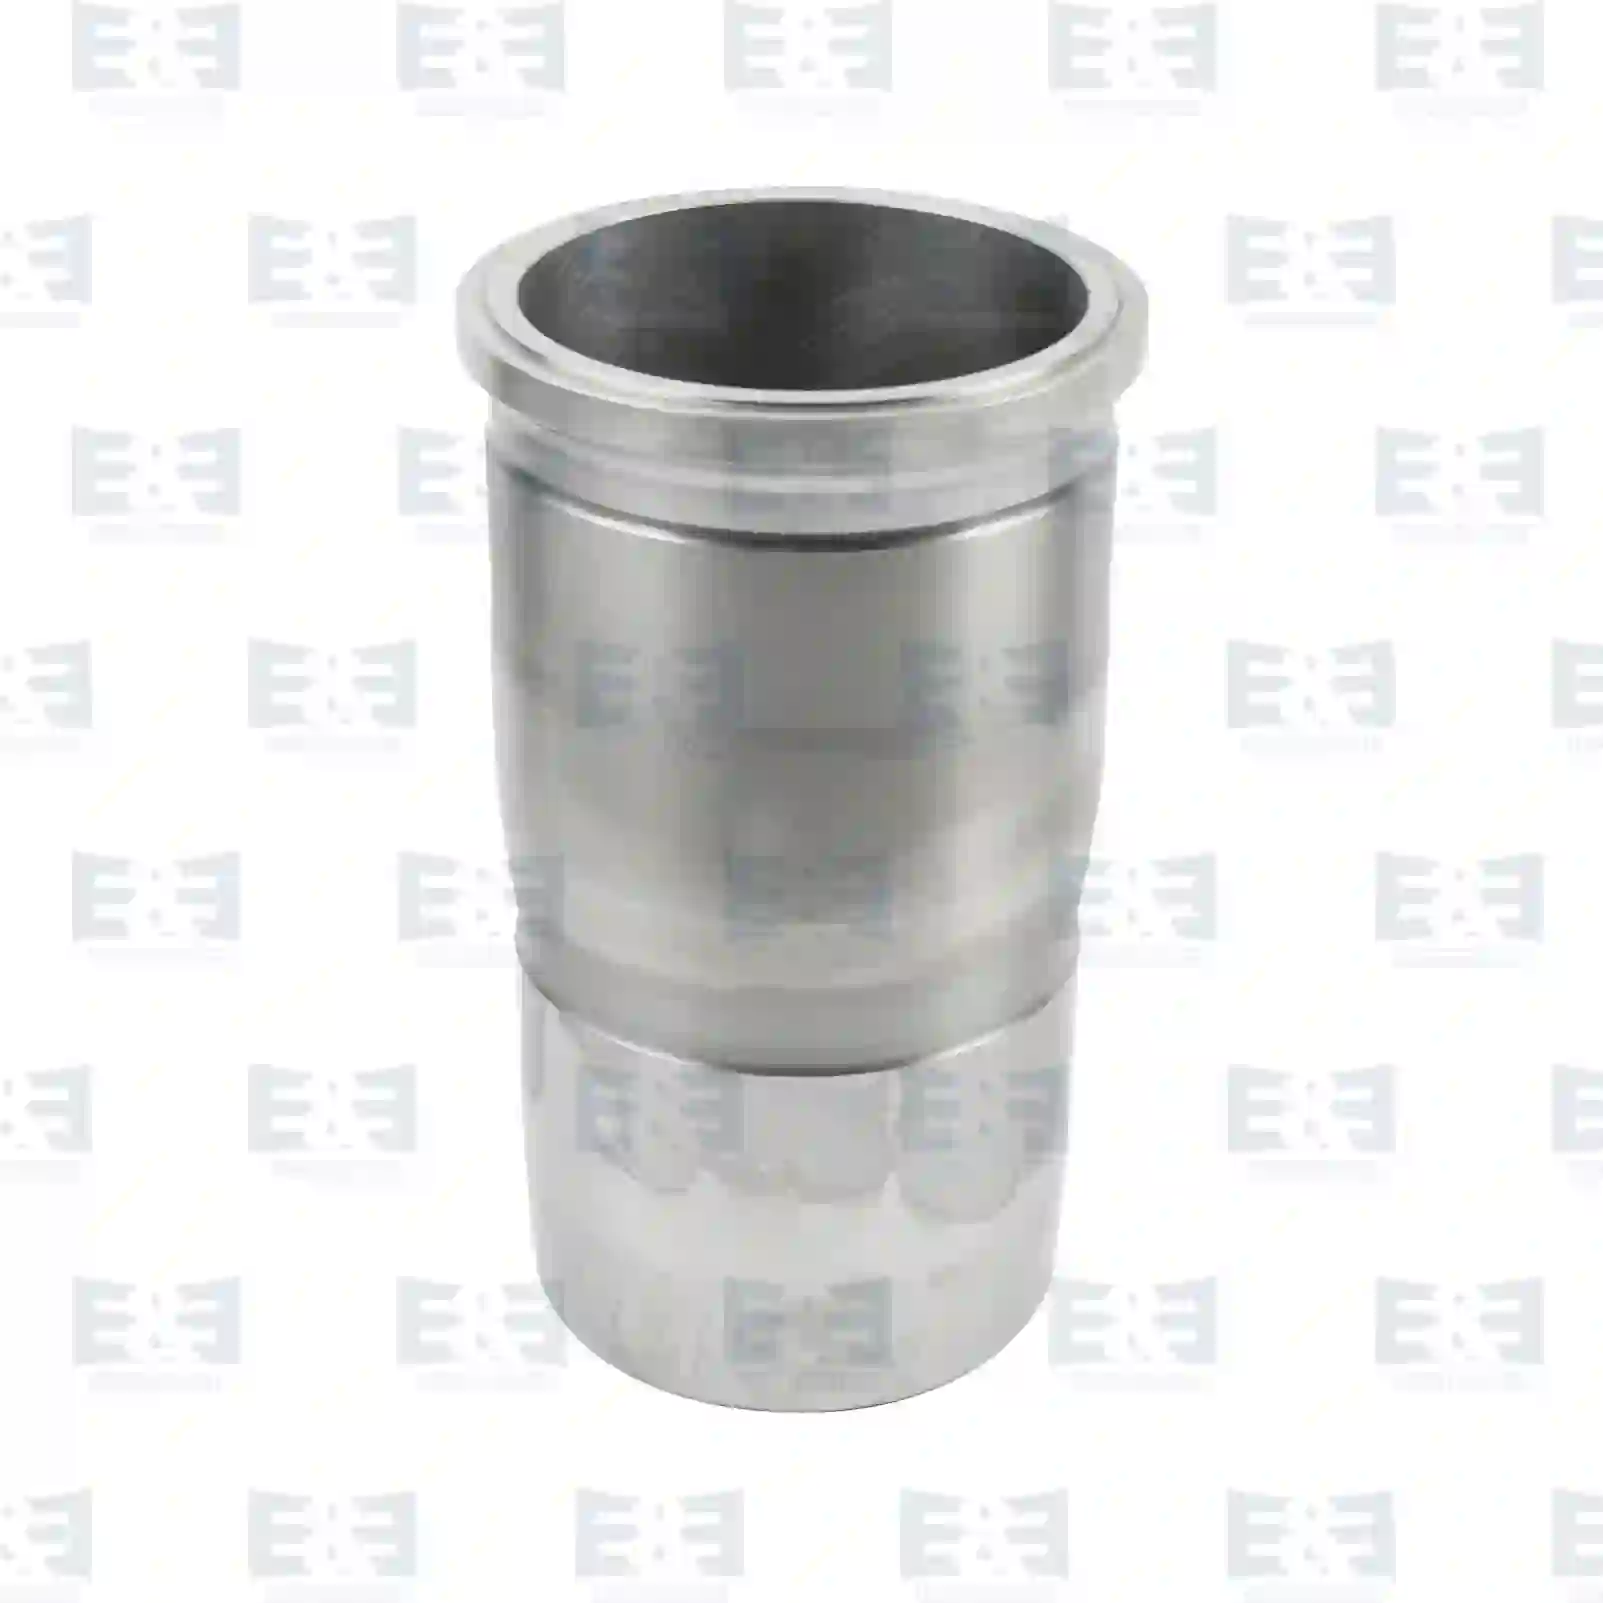 Cylinder liner, without seal rings, 2E2207709, 20451502, 20480098, 20498544, 207623422, ZG01079-0008 ||  2E2207709 E&E Truck Spare Parts | Truck Spare Parts, Auotomotive Spare Parts Cylinder liner, without seal rings, 2E2207709, 20451502, 20480098, 20498544, 207623422, ZG01079-0008 ||  2E2207709 E&E Truck Spare Parts | Truck Spare Parts, Auotomotive Spare Parts